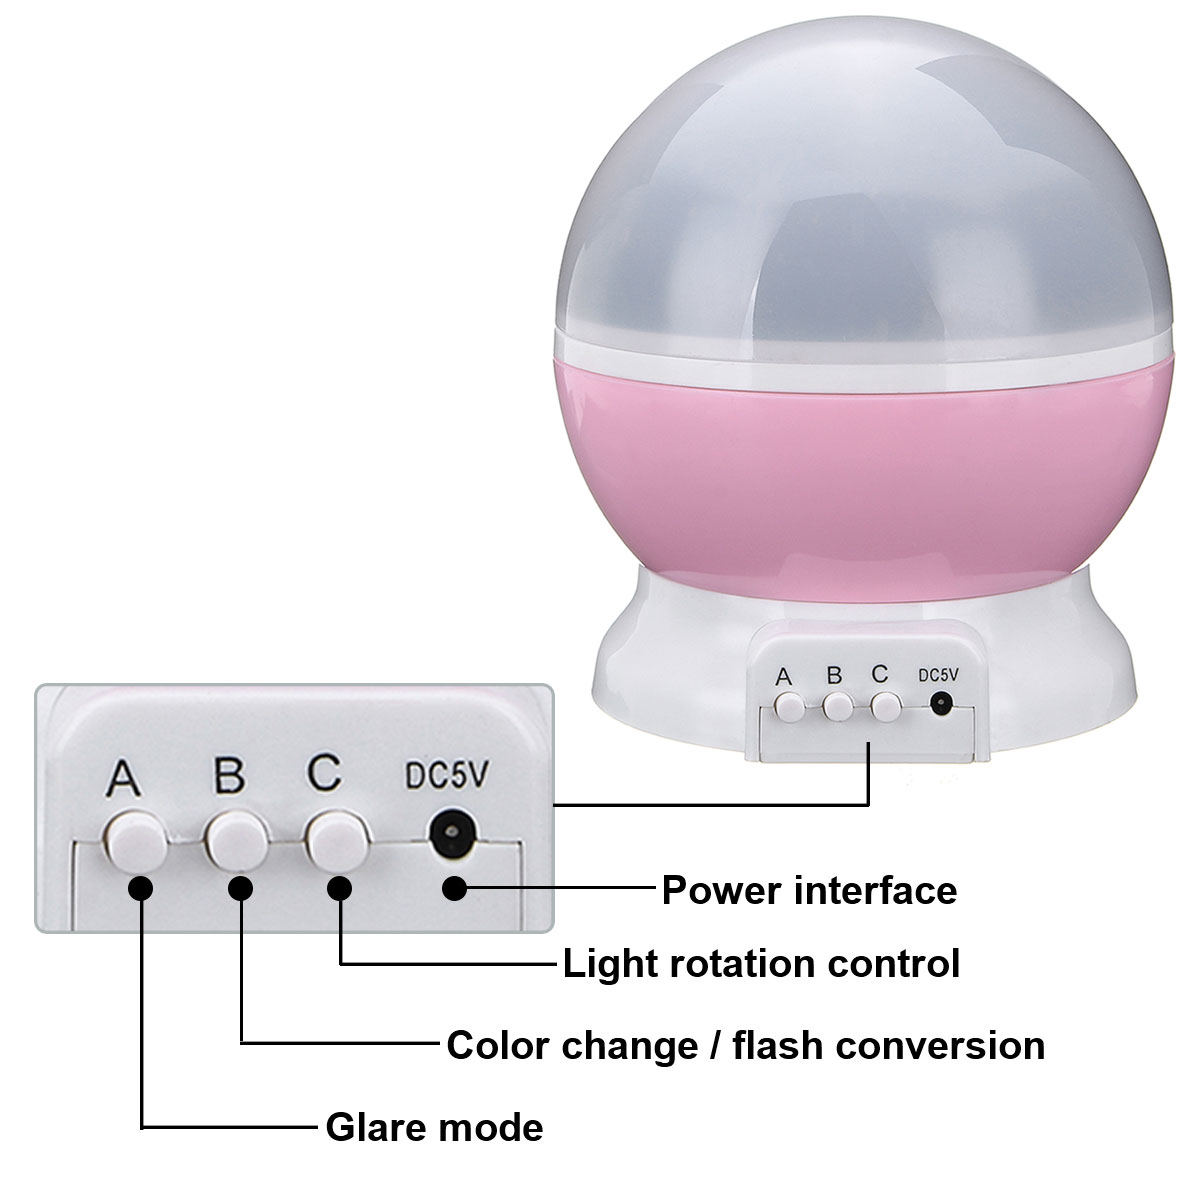 LED-Starry-Projector-Lamp-Baby-Night-Light-USB-Romantic-Rotating-Moon-Cosmos-Sky-Star-Projection-Lam-1937902-3